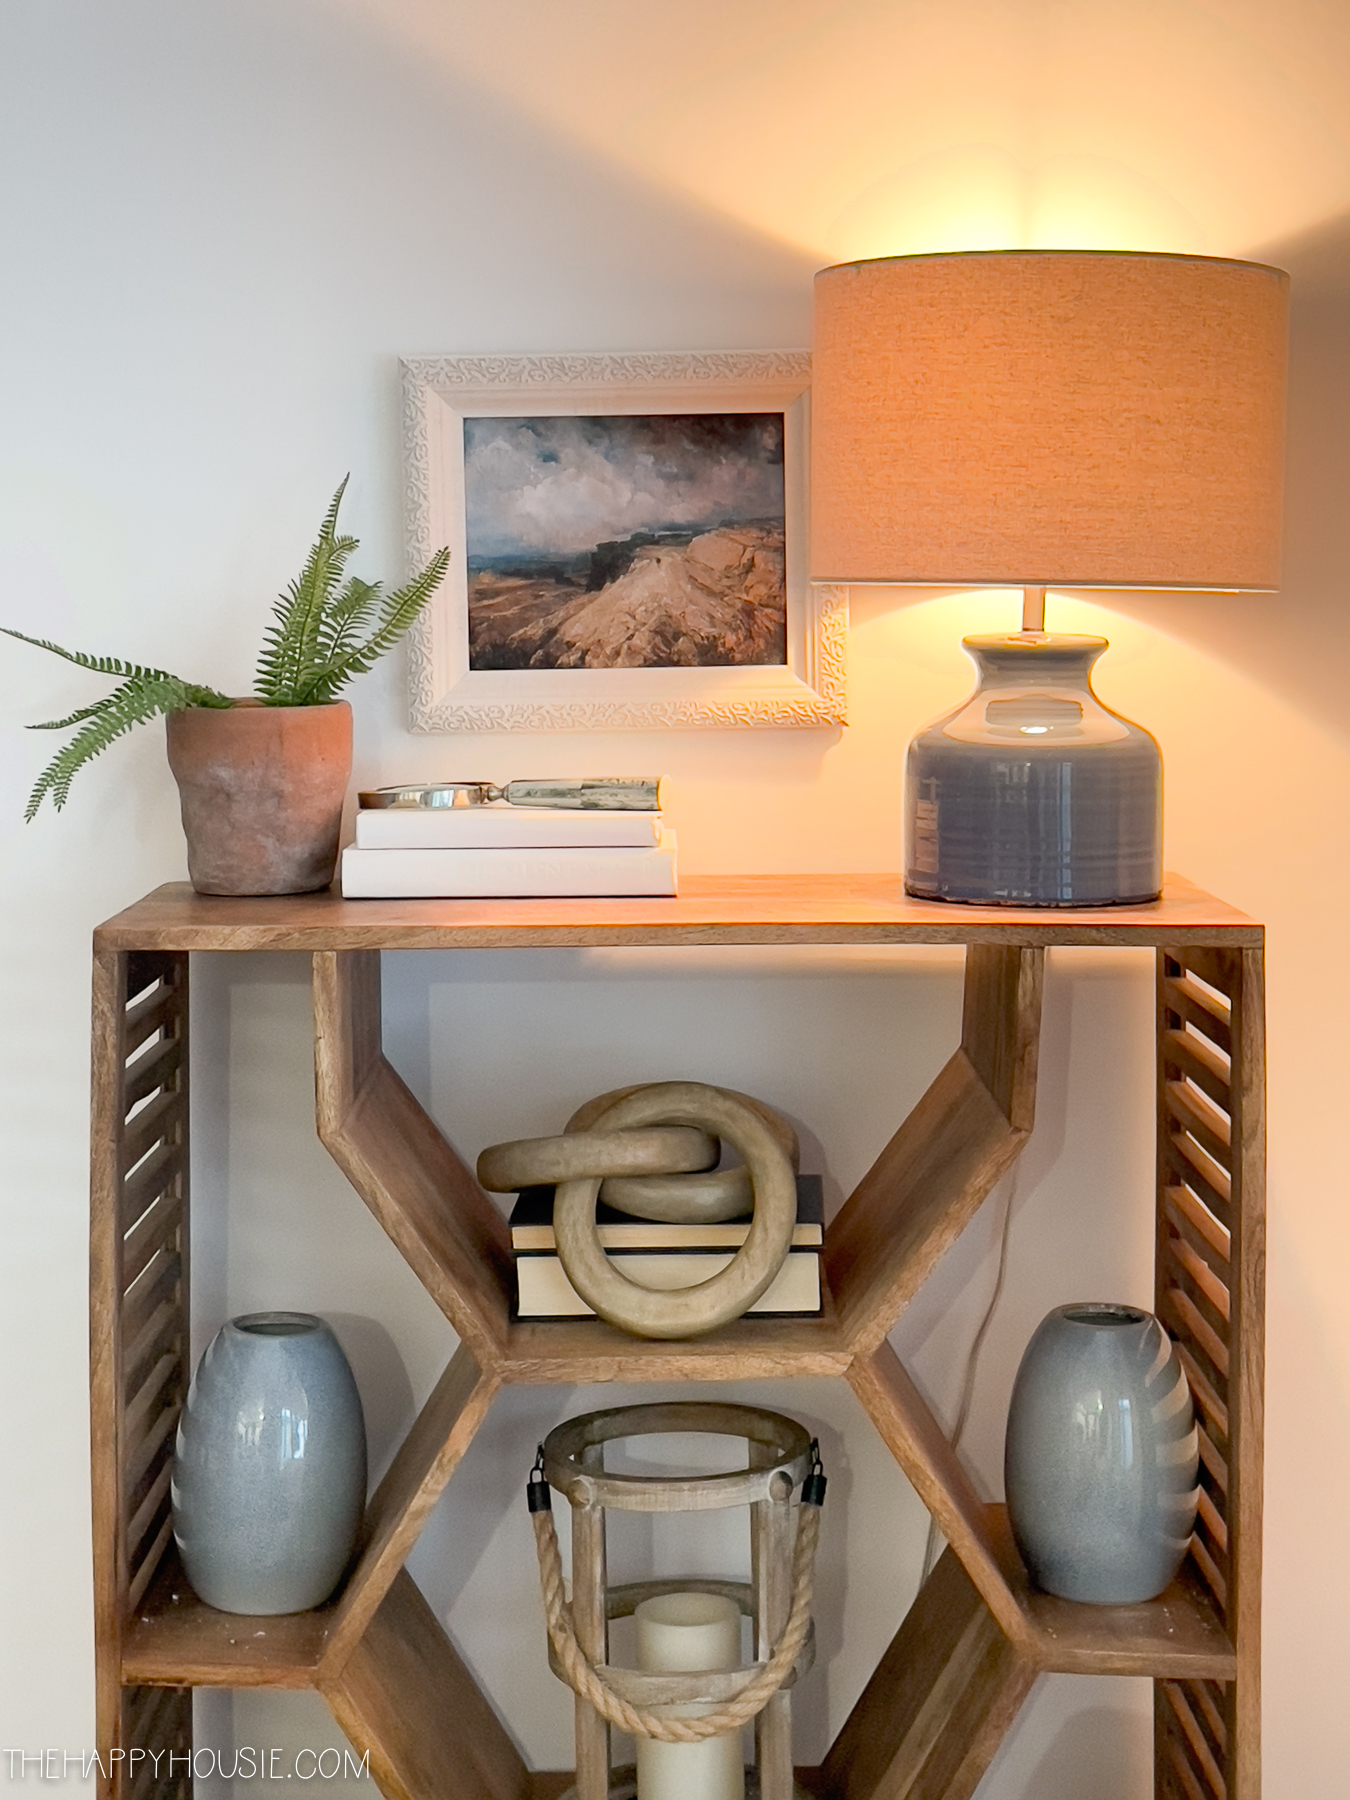 A wooden shelving unit with a lamp on top.